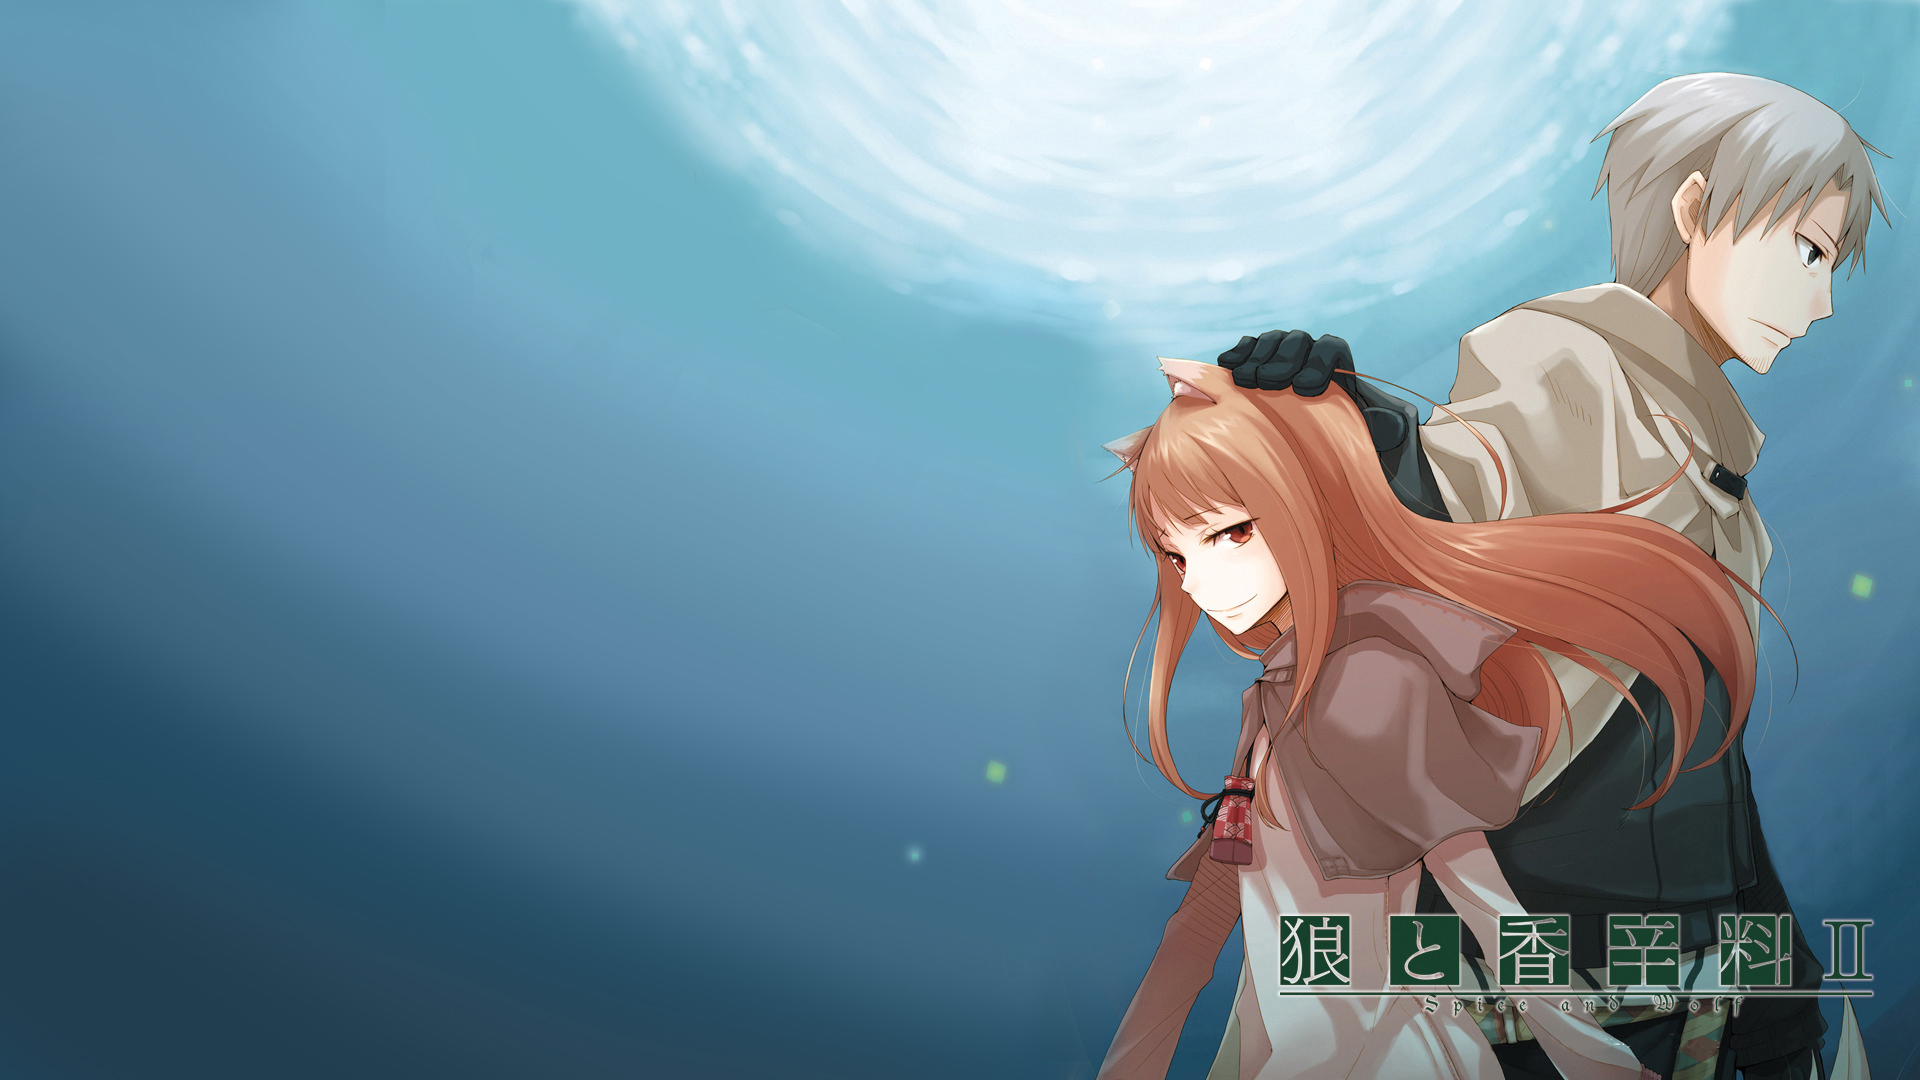 High Resolution Wallpaper | Spice And Wolf 1920x1080 px